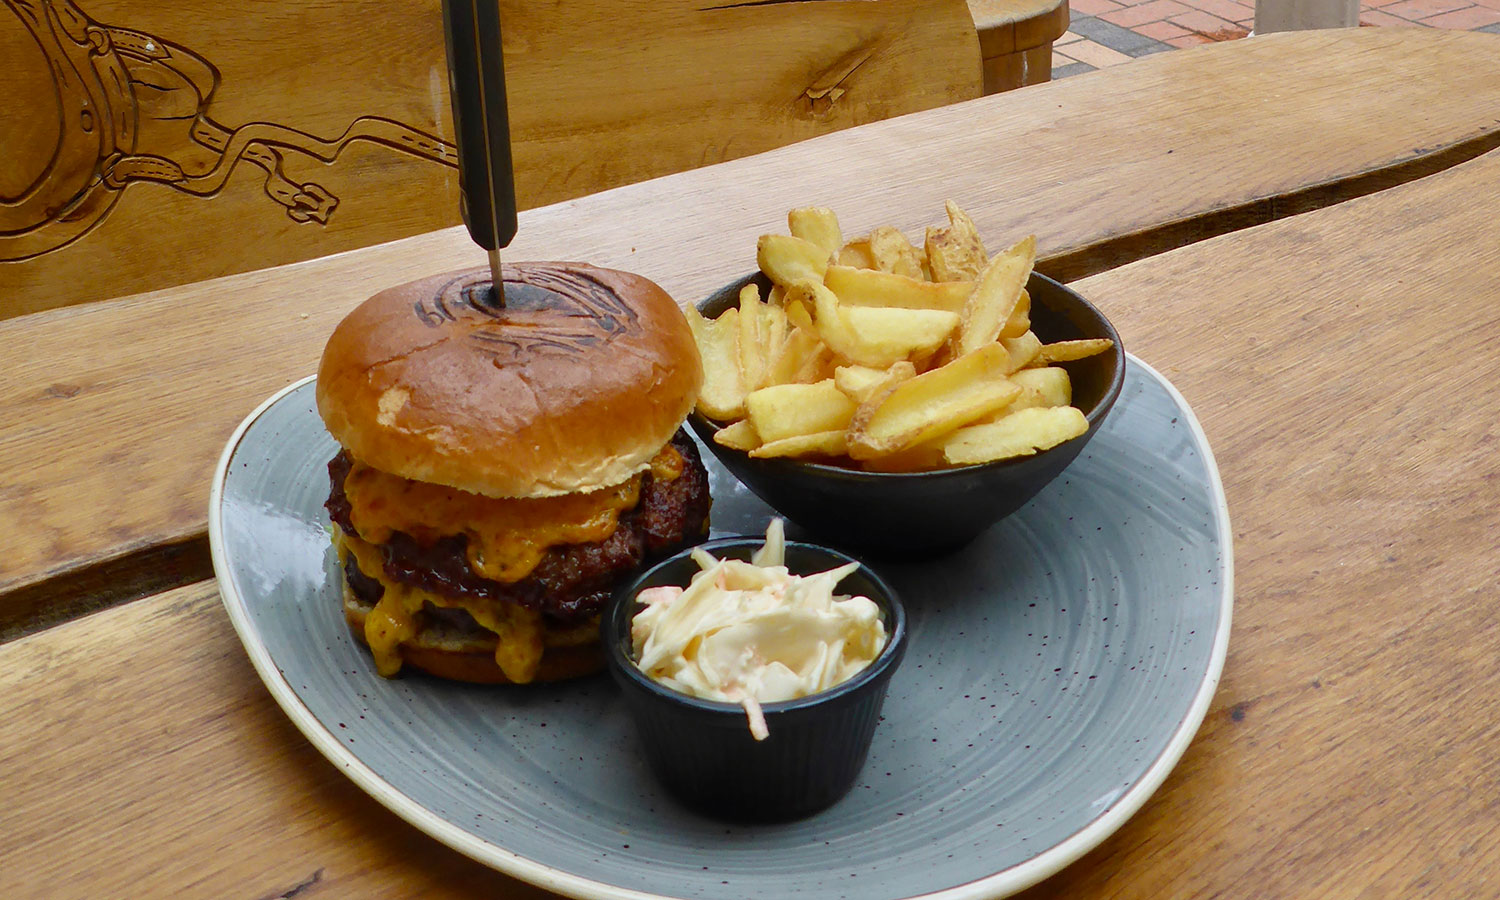 A delicious burger and chips in Y Stablau or roast organic beef from Rhug Estate in the Grill Room - choice is yours! 